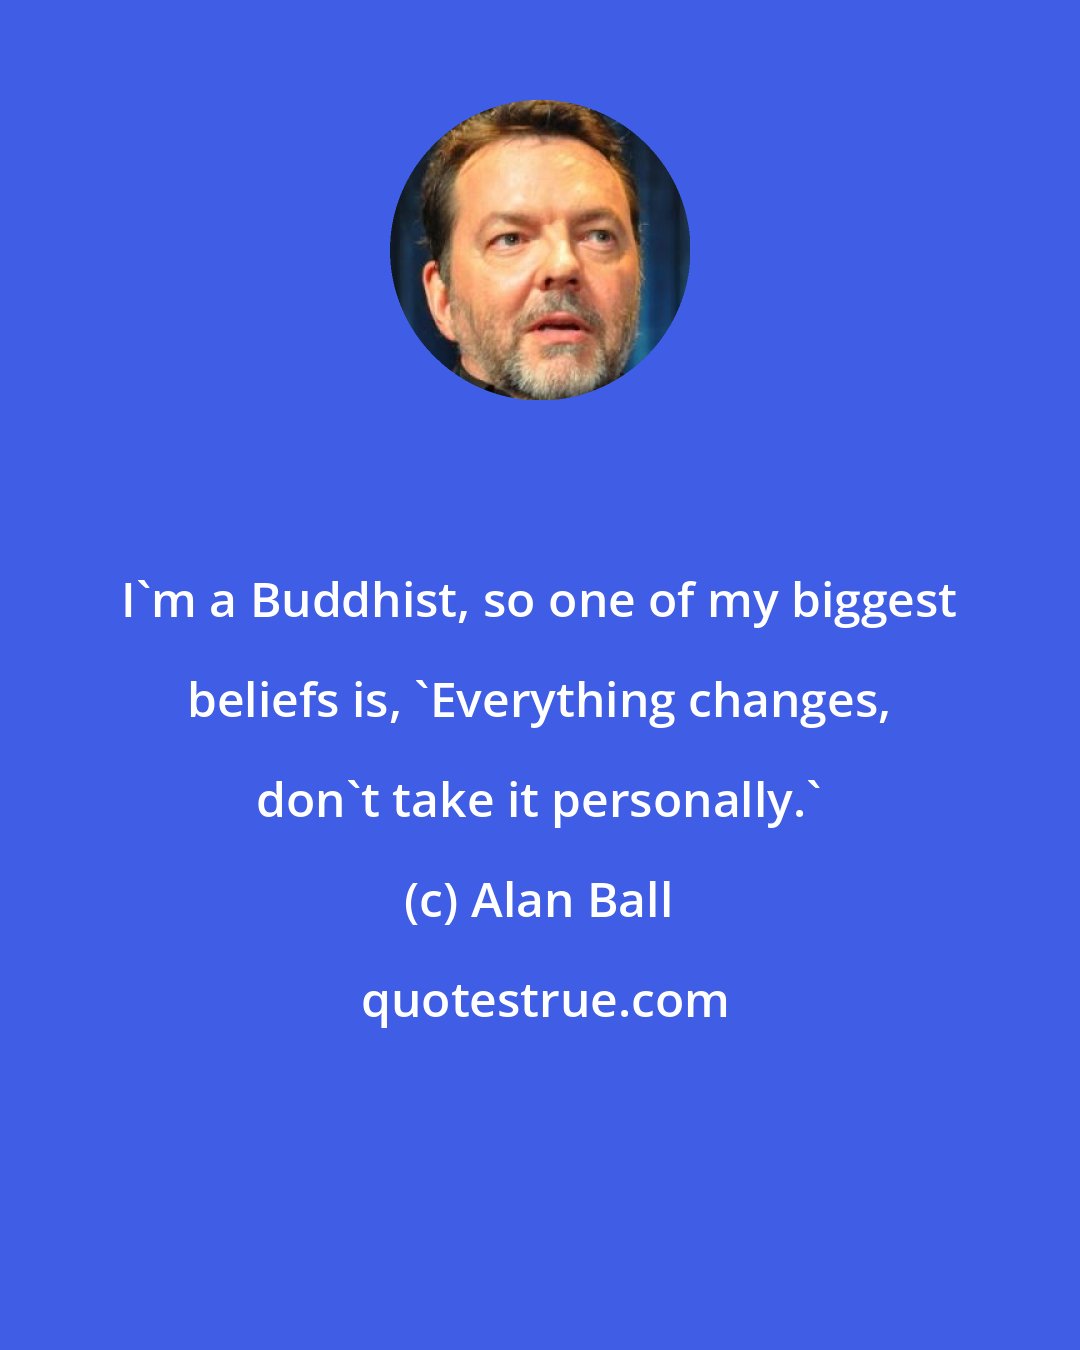 Alan Ball: I'm a Buddhist, so one of my biggest beliefs is, 'Everything changes, don't take it personally.'